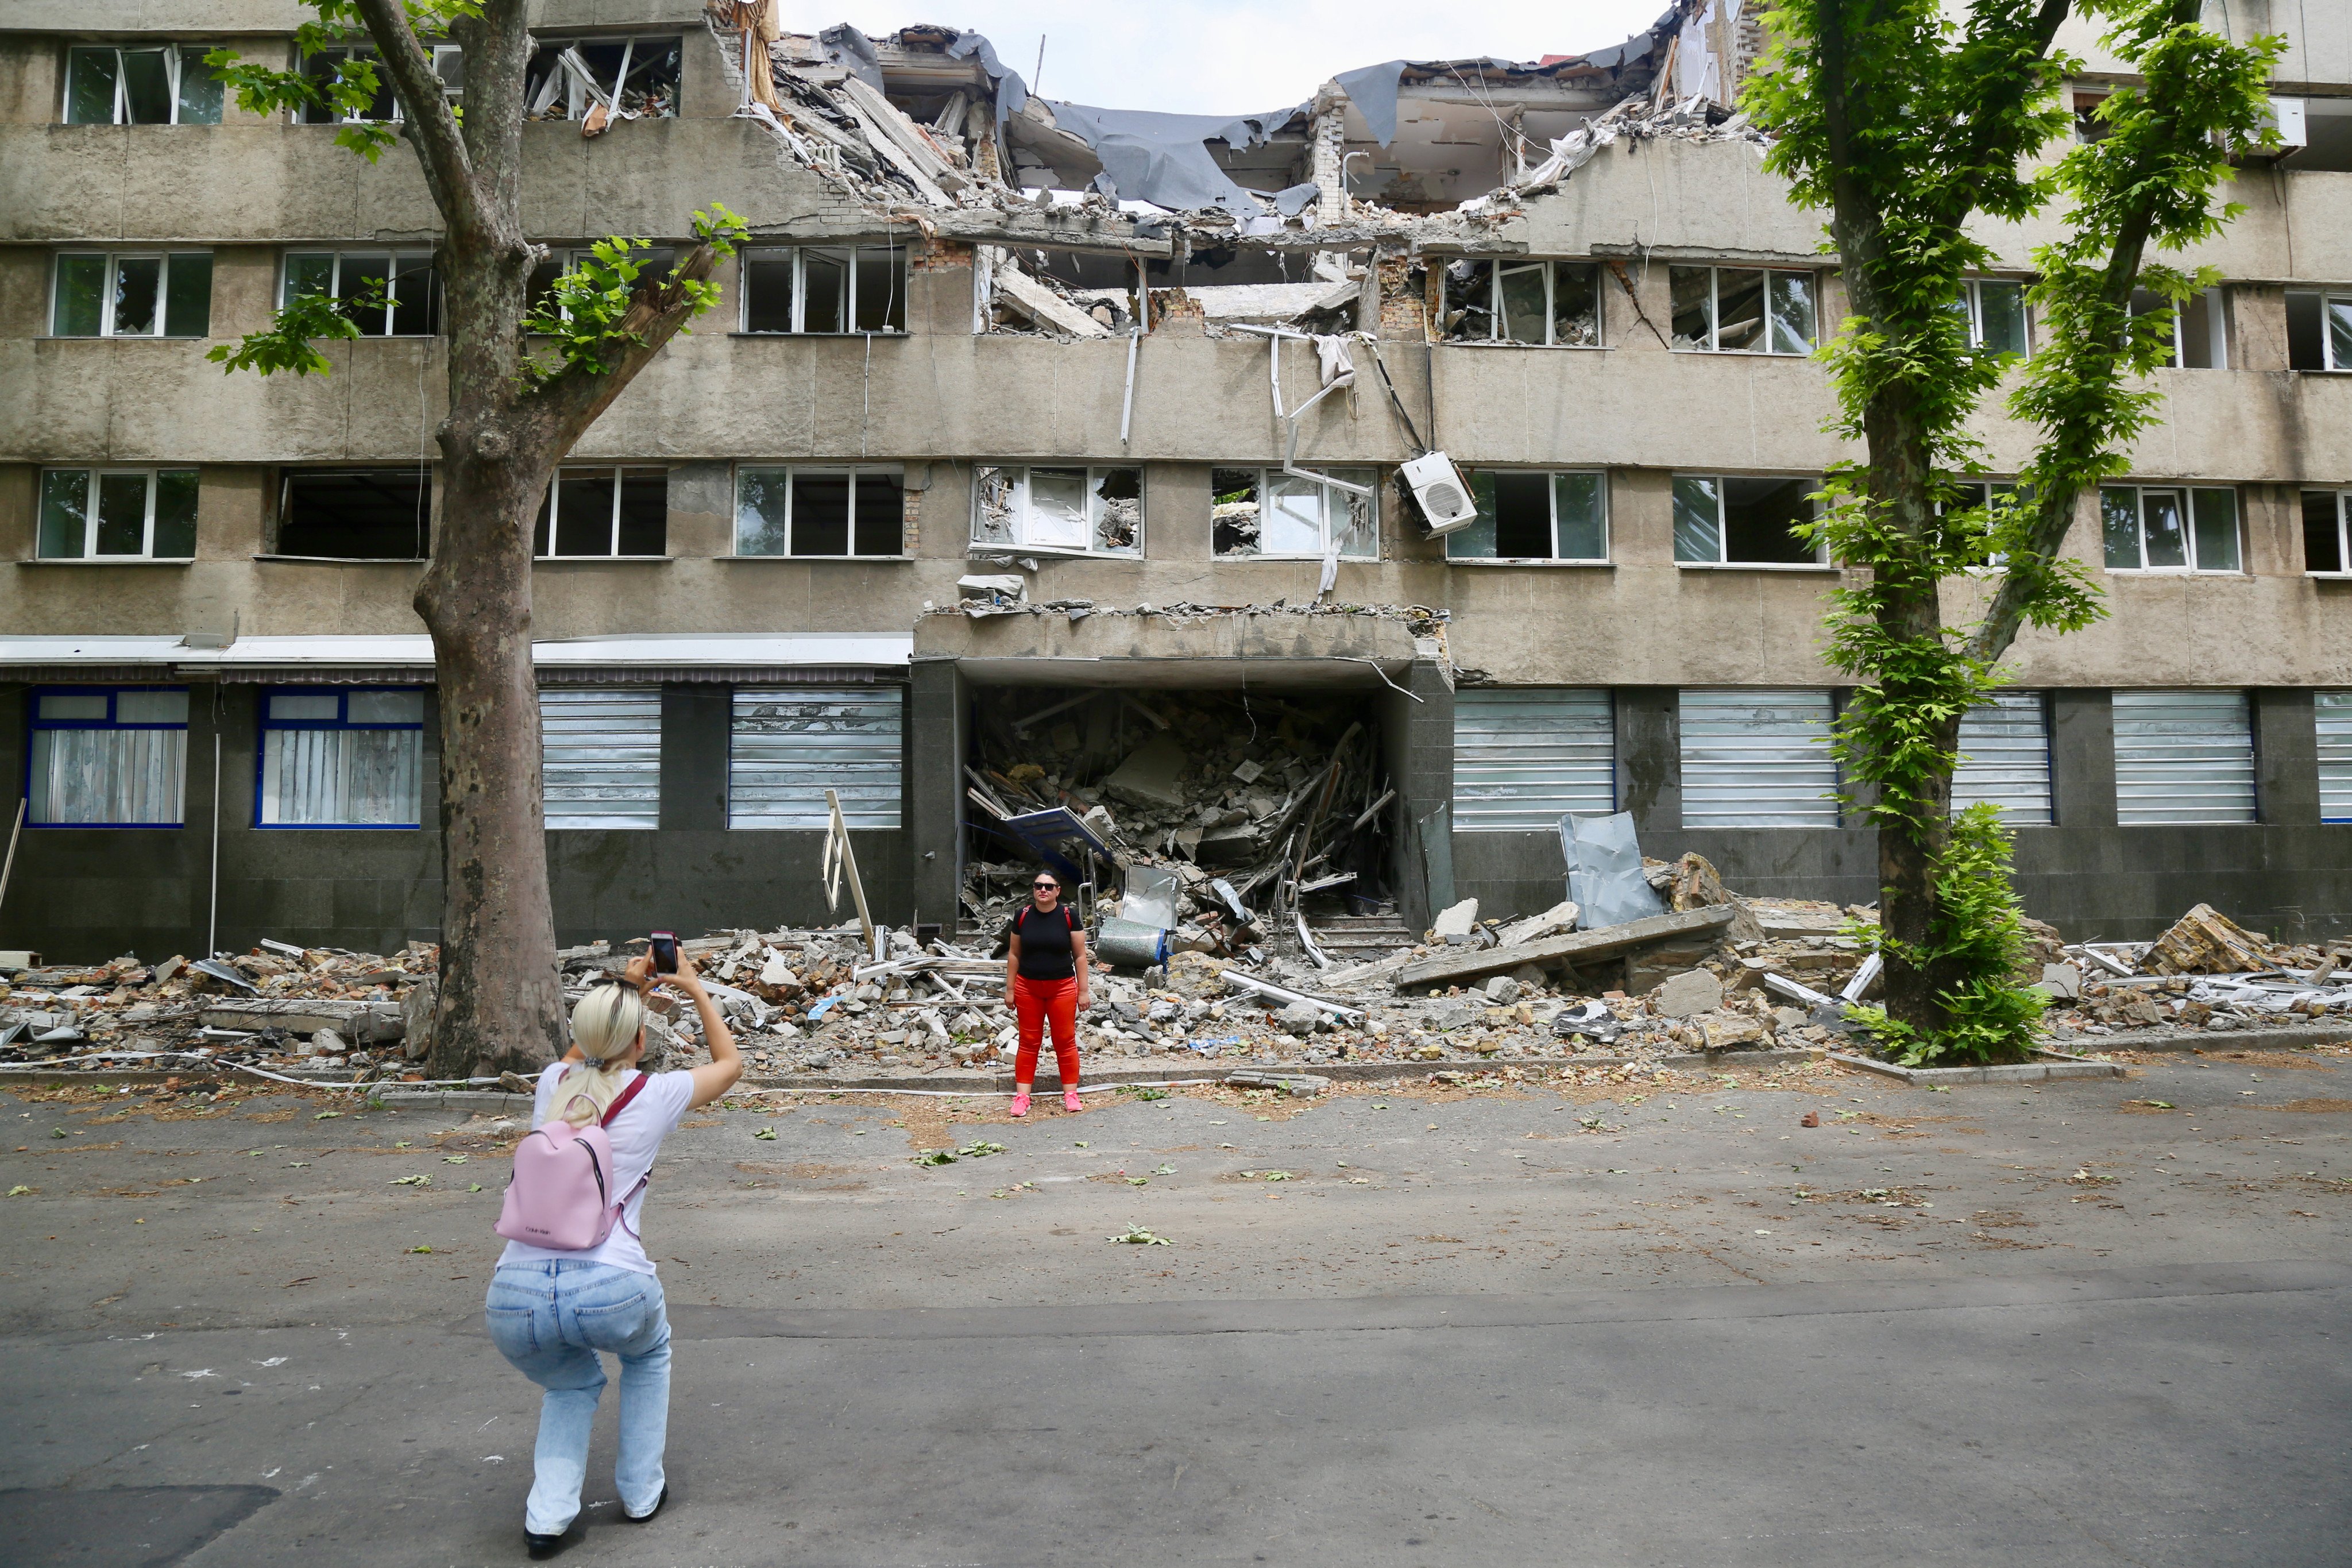 War tourists take photos outside a bombed out building in Mykolaiv, a city about 130km from Odesa, in Ukraine. Photo: Ian Neubauer